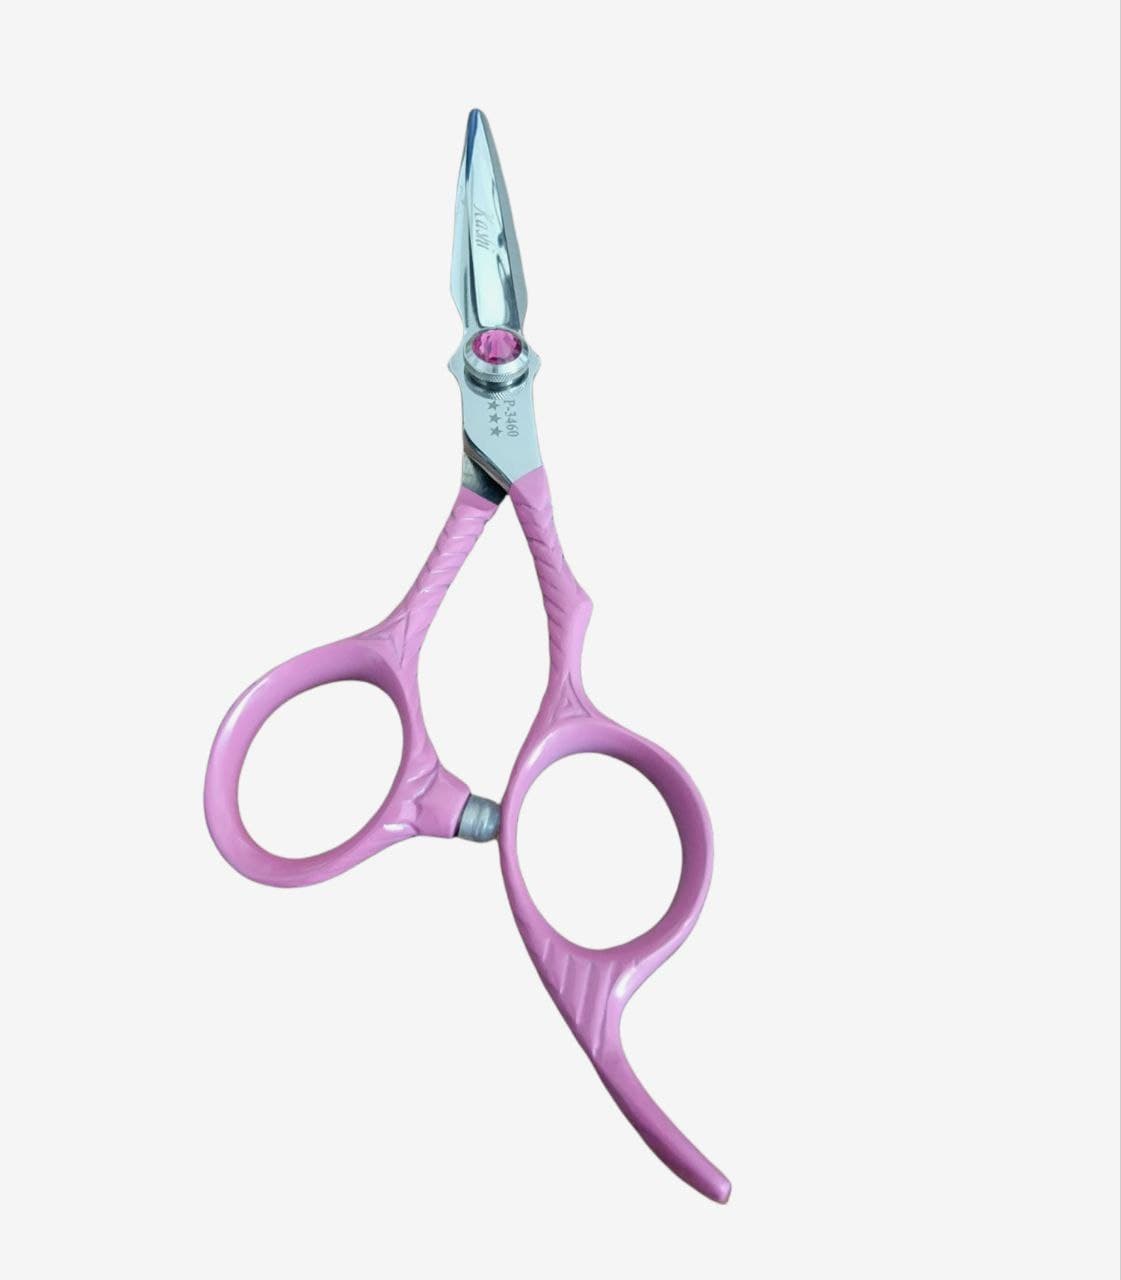 Kashi P-3460 Professional Shears, Hair Cutting  Japanese  Steel,  6 inch  Pink Color